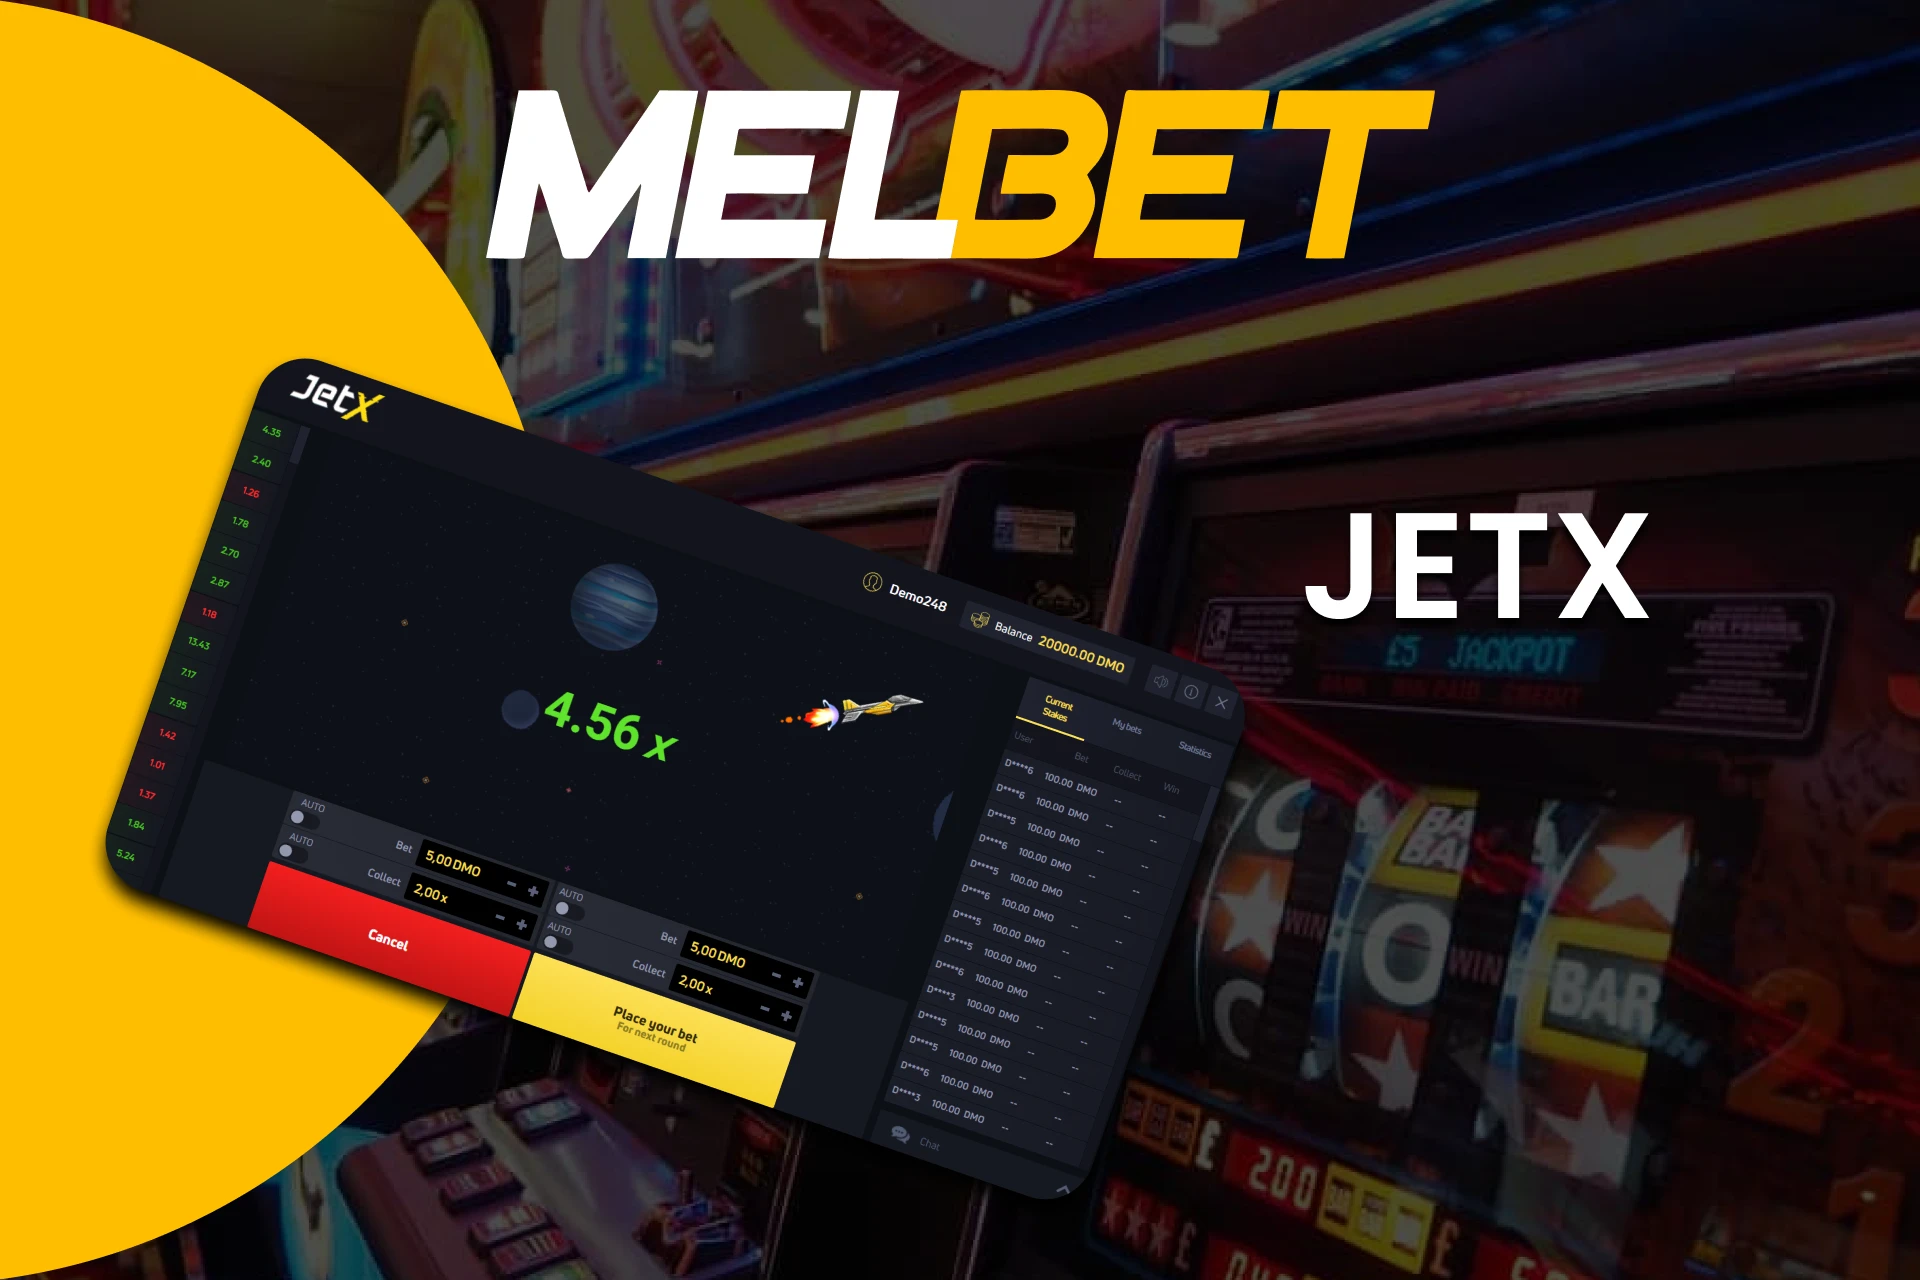 Choose the game JetX from the Crash section from Melbet.